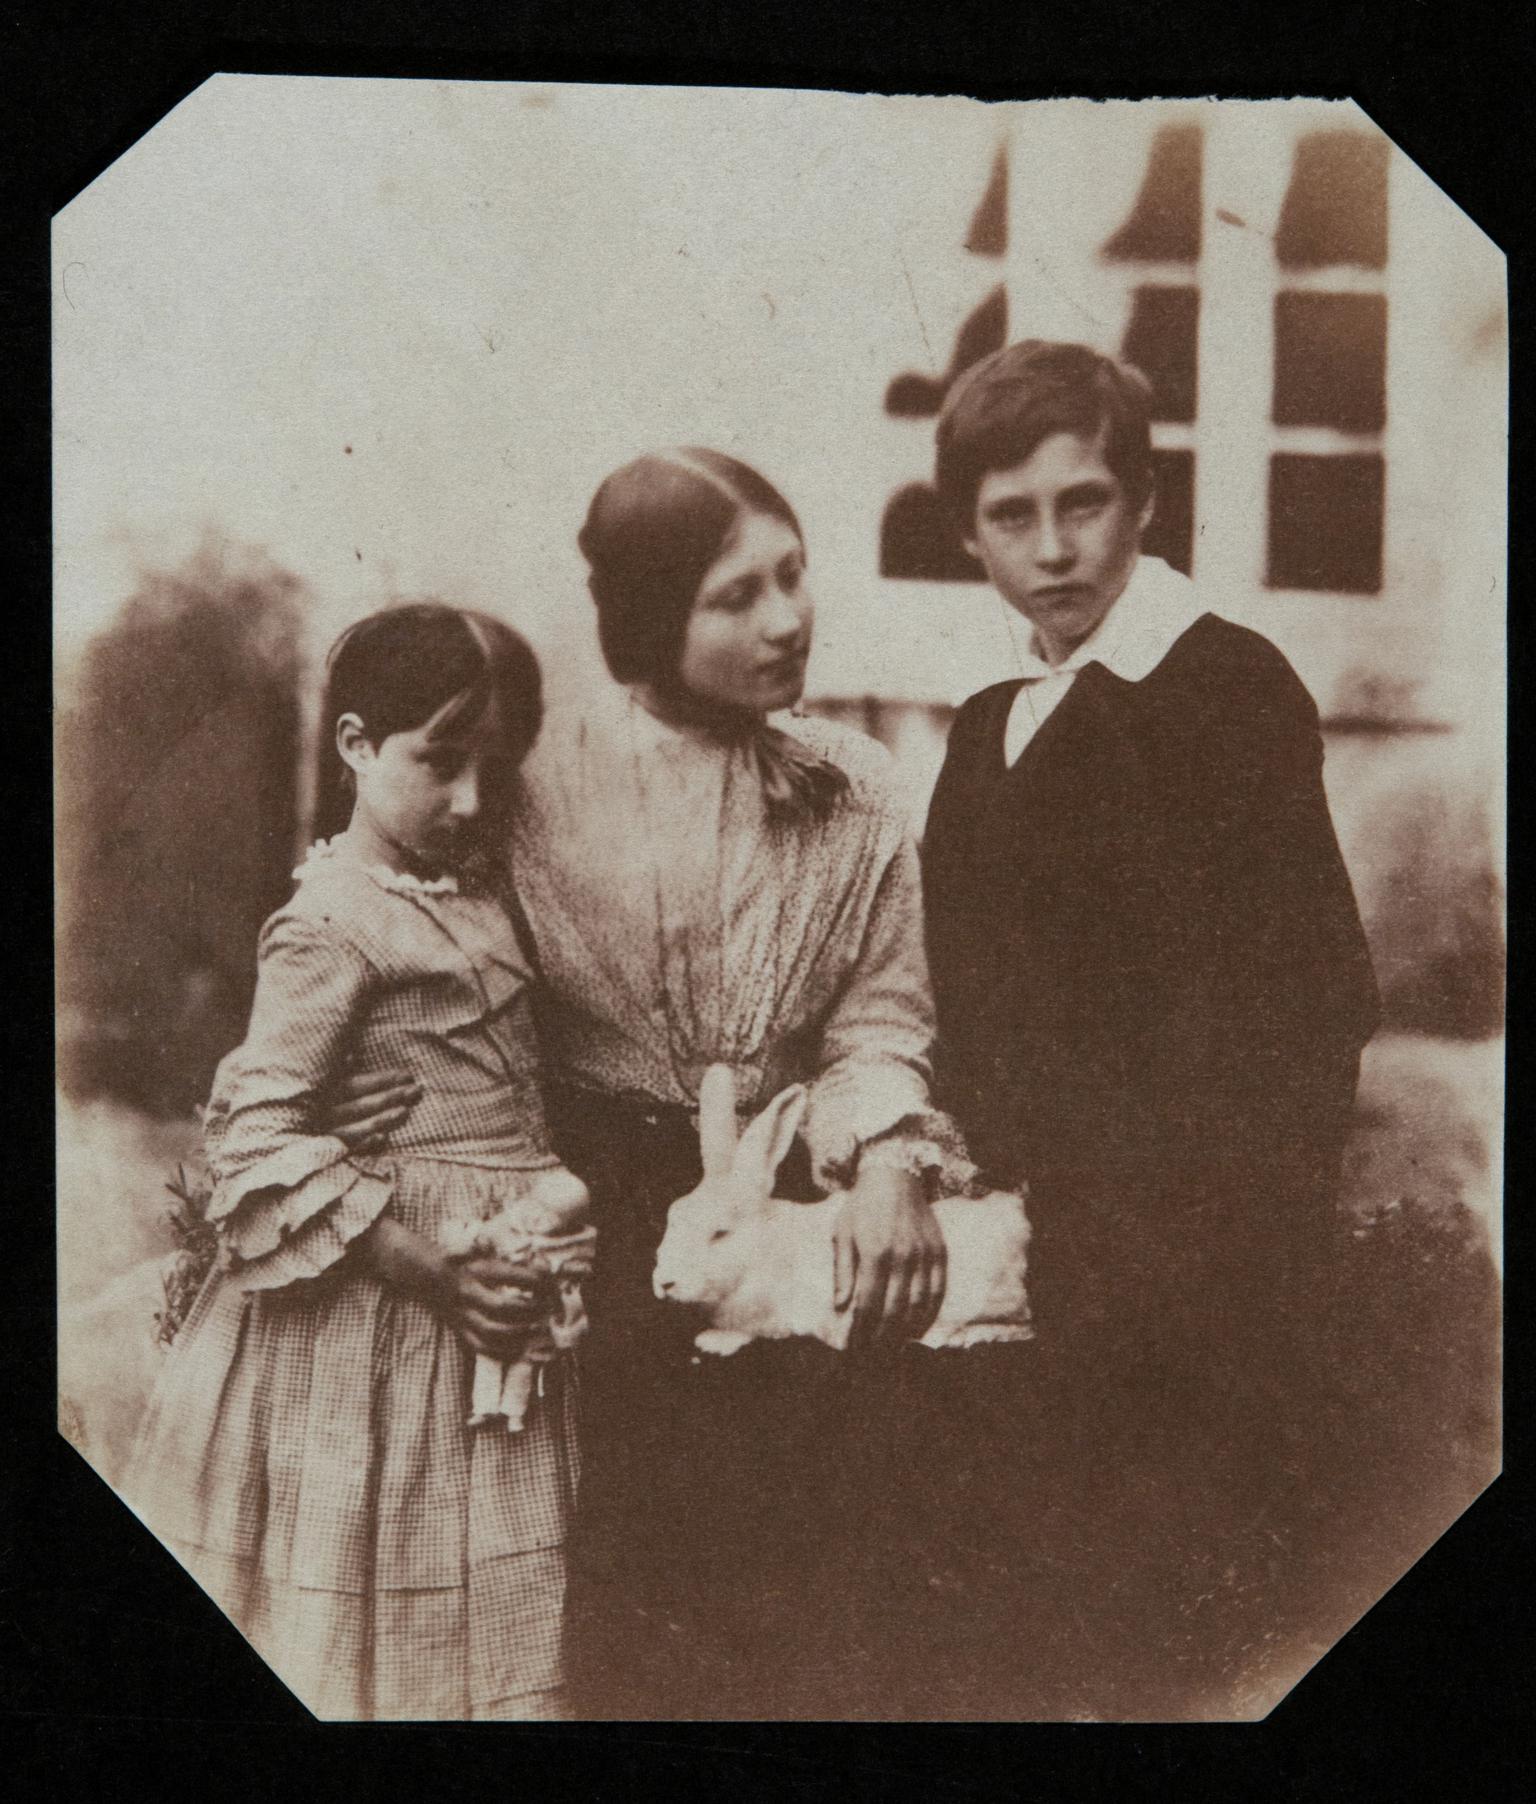 William, Thereza and Lucy with rabbit, photograph